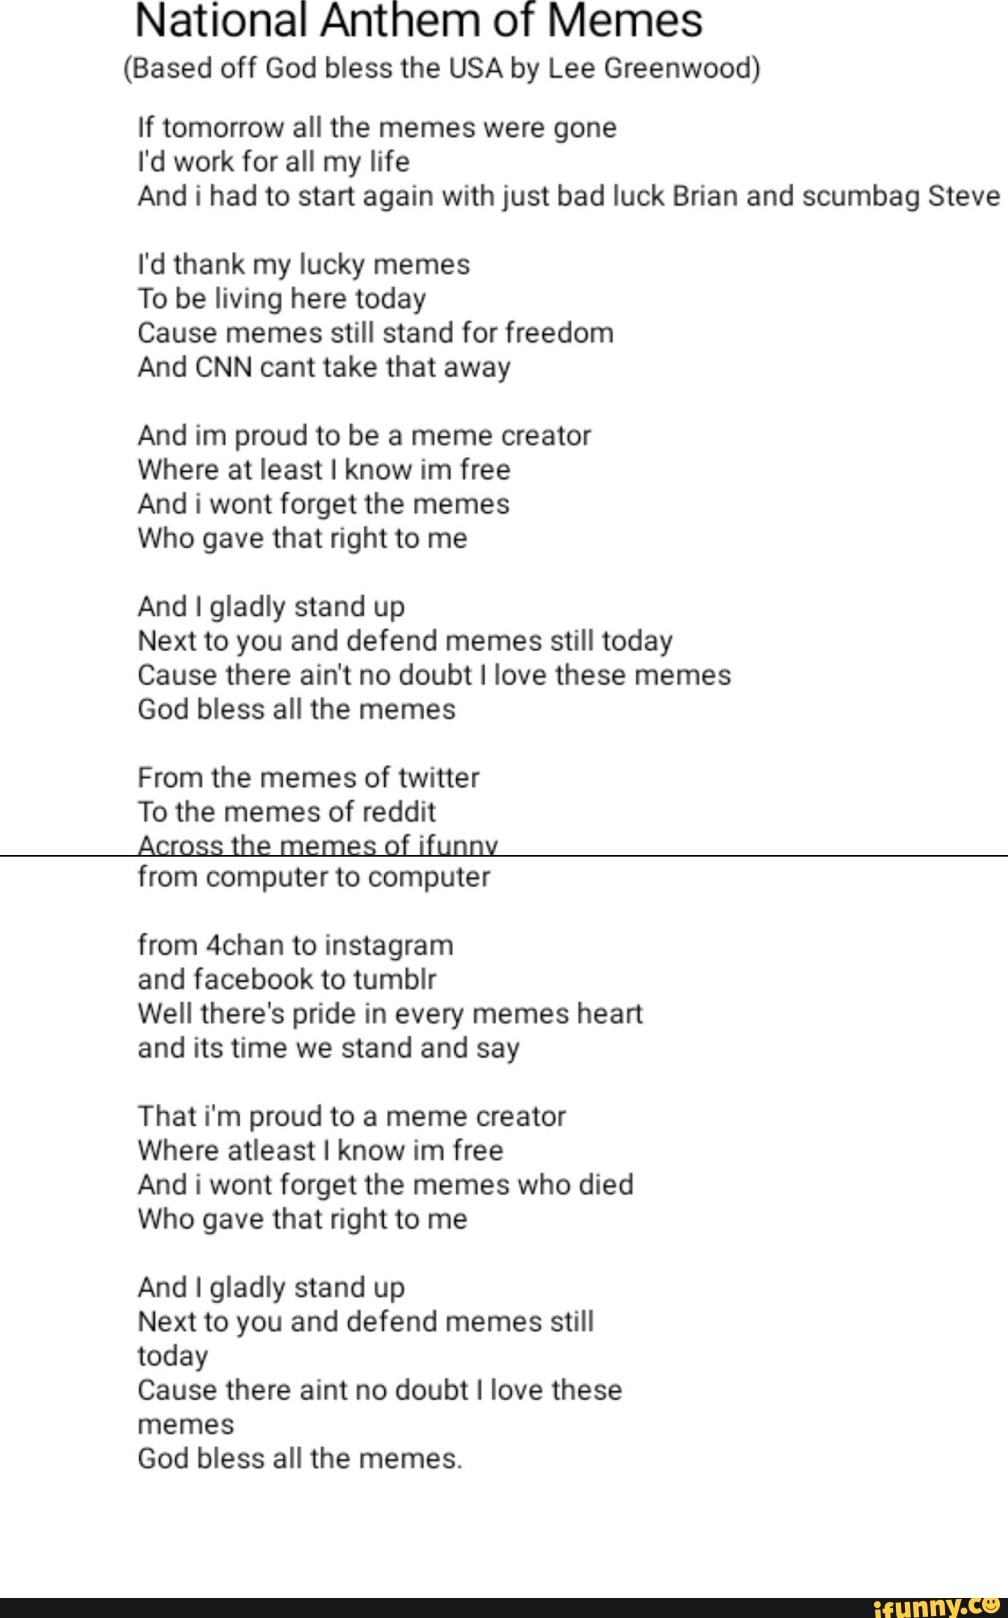 National Anthem Of Memes Based Off God Bless The Usa By Lee Greenwood If Tomorrow All The Memes Were Gone I D Work For All My Life And I Had To Start Again